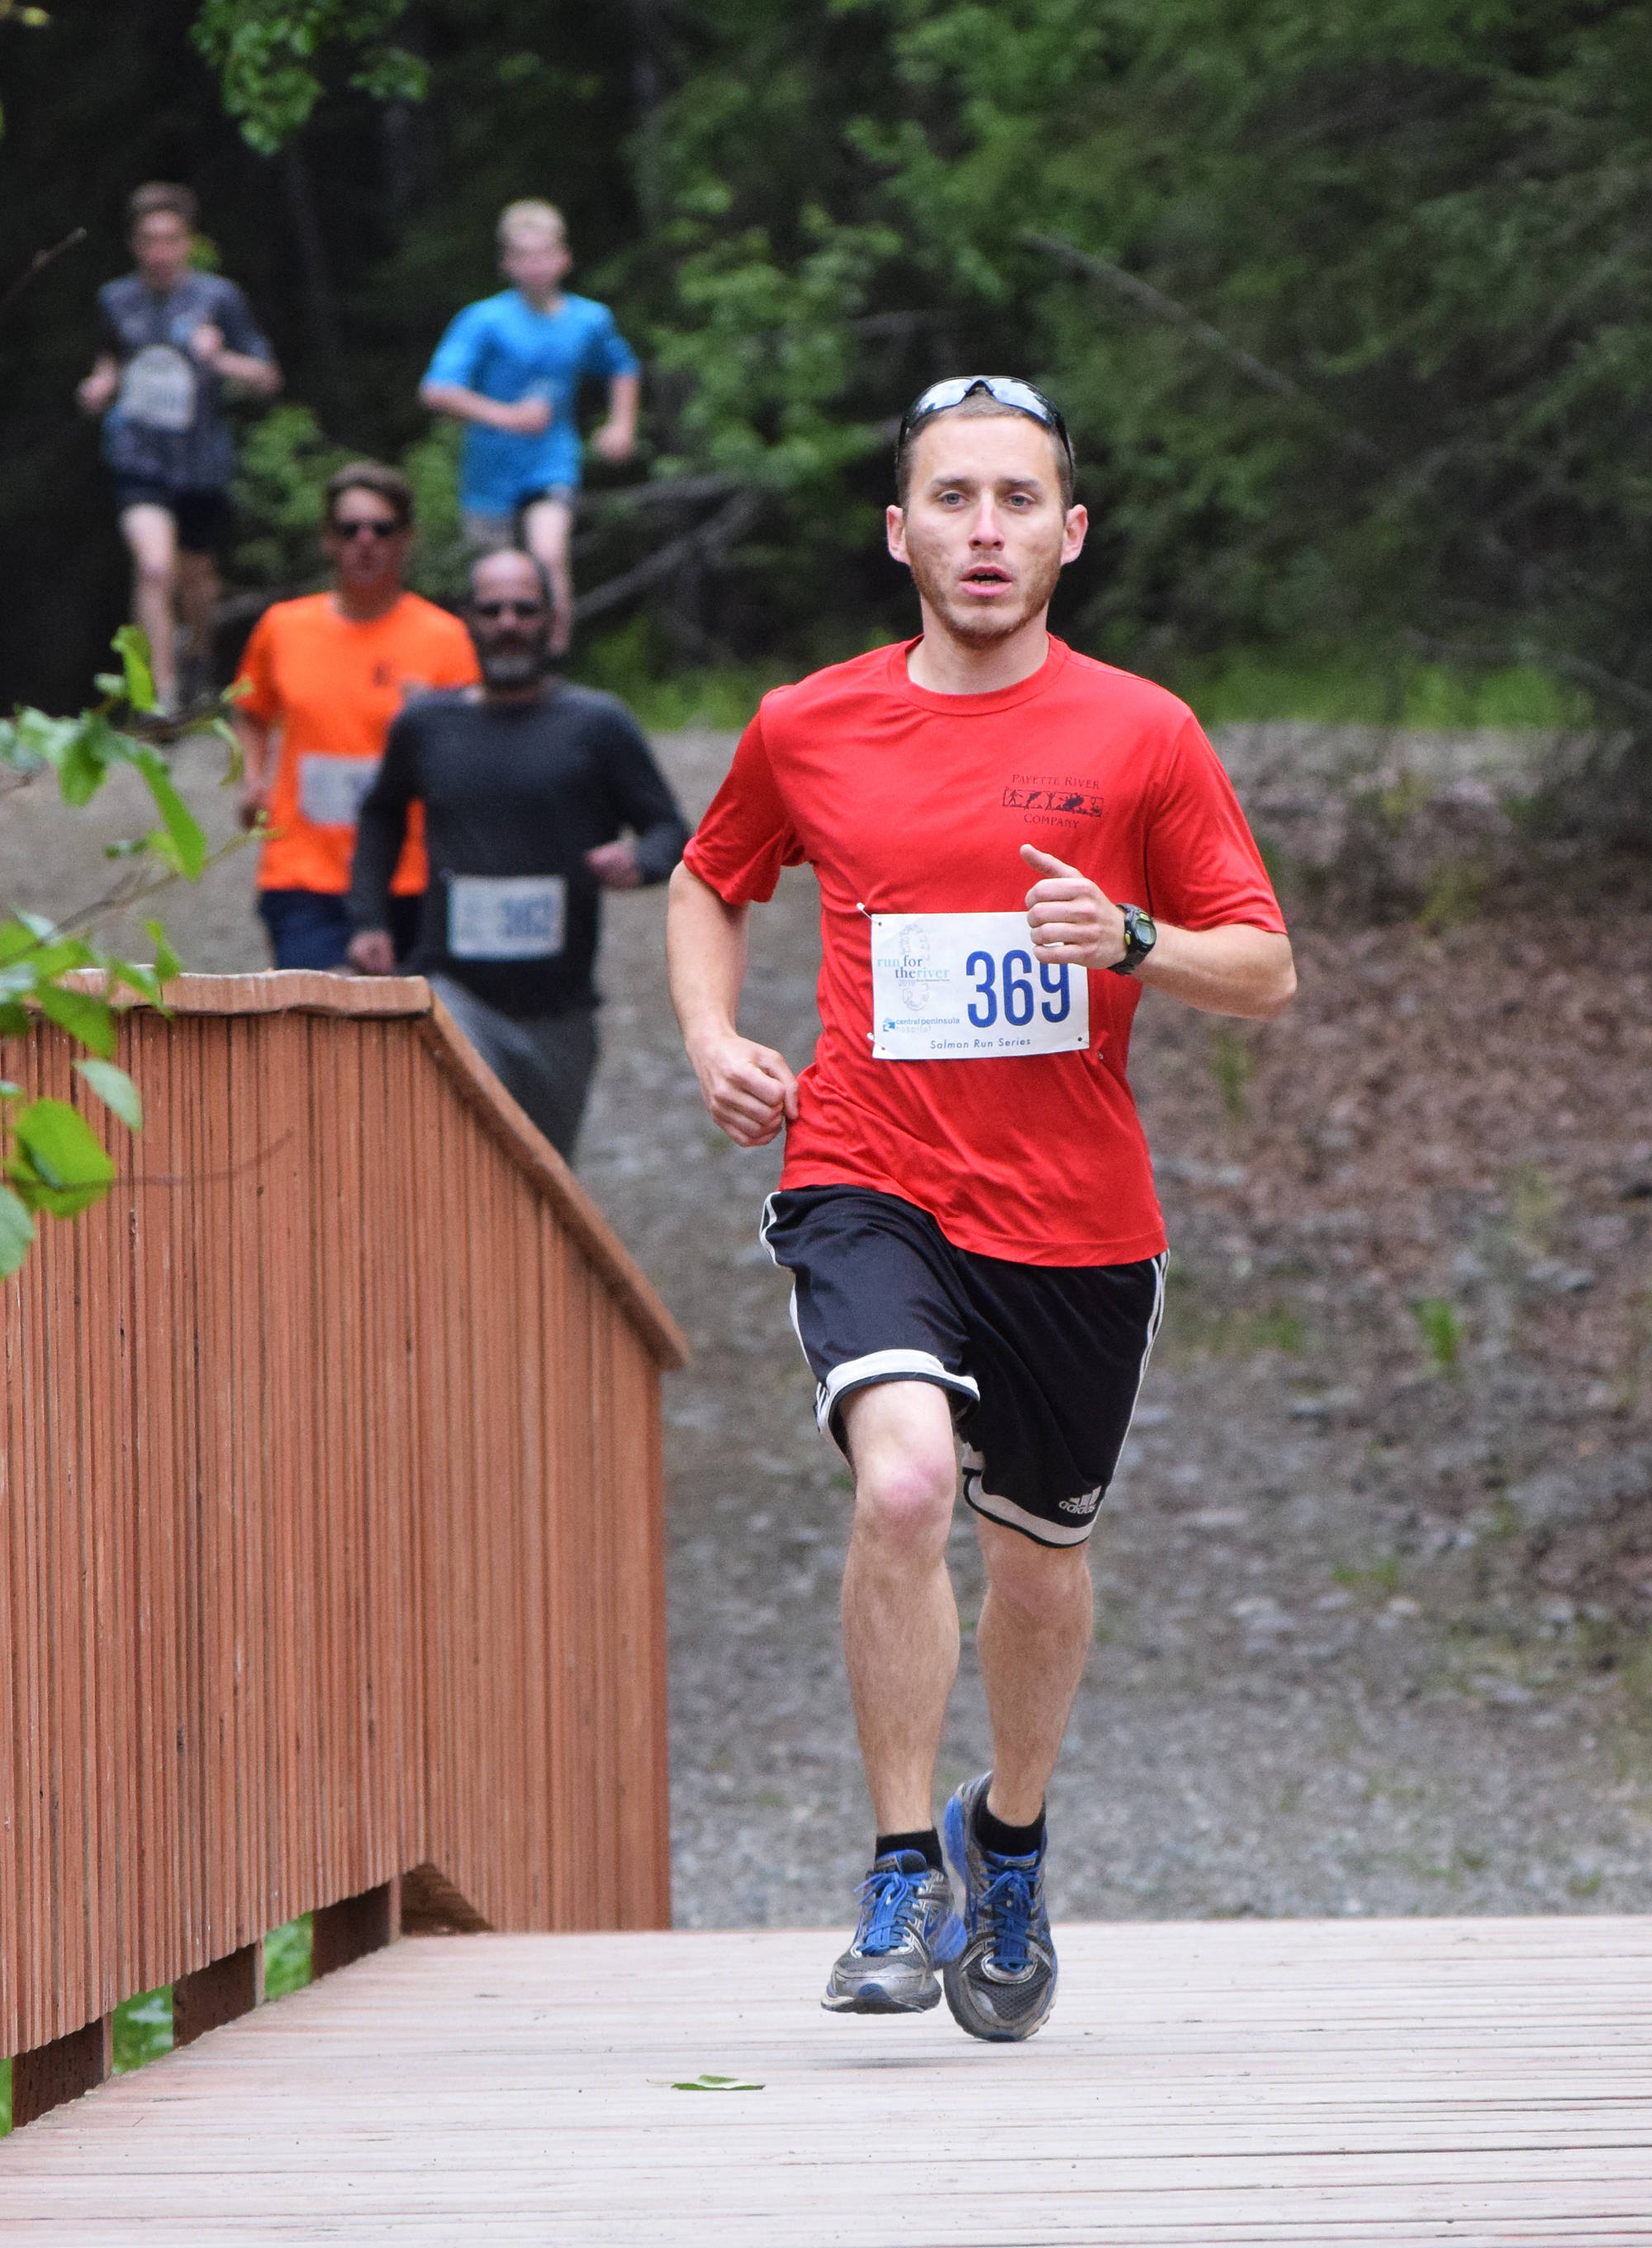 Eventual men’s 5K winner Spencer Townsend leads the field early over a bridge Saturday, June 8, 2019, at the Run for the River 5-kilometer/10-mile races in Soldotna, Alaska. (Photo by Joey Klecka/Peninsula Clarion)